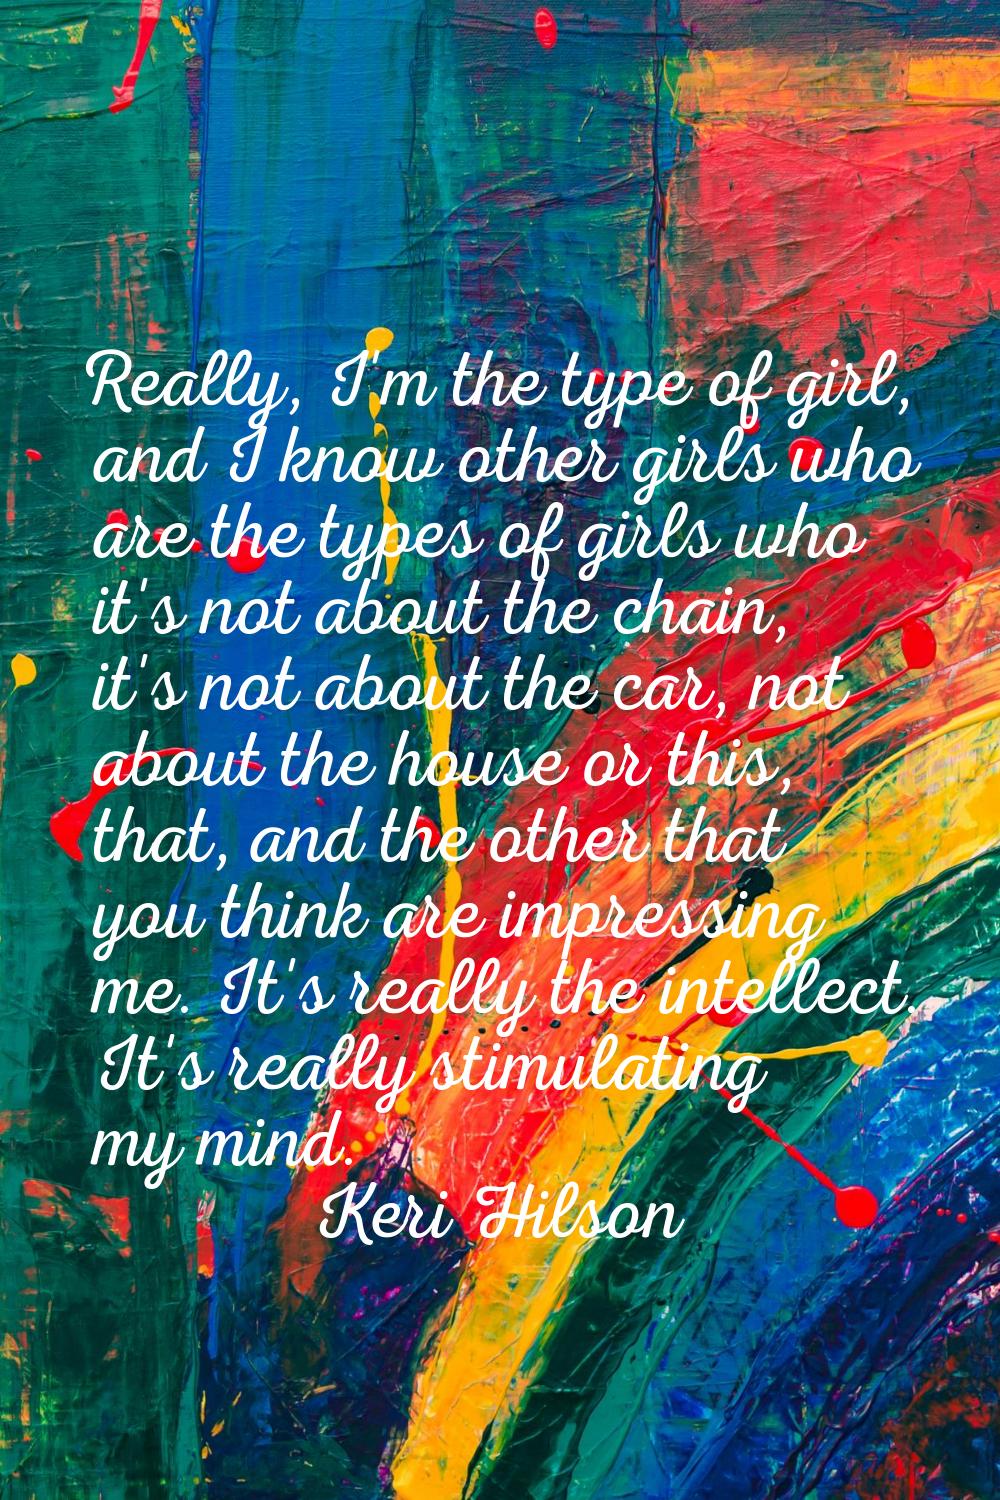 Really, I'm the type of girl, and I know other girls who are the types of girls who it's not about 